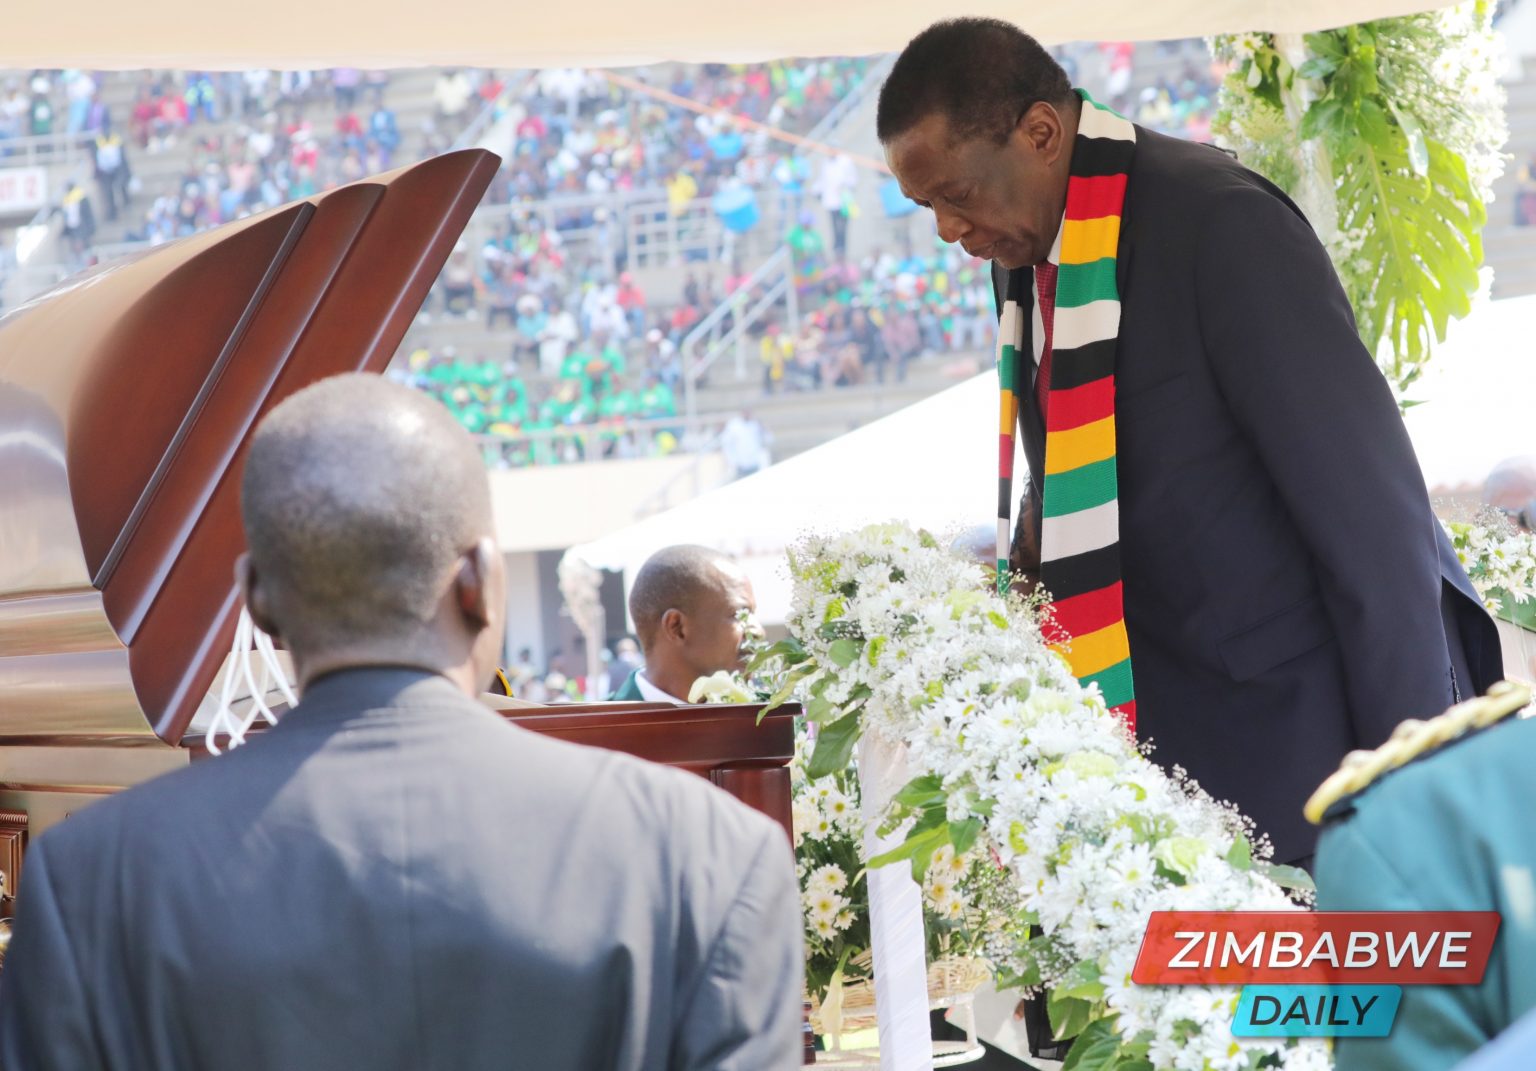 President Emmerson Mnangagwa paying his last respect to Cde Robert Gabriel during a funeral service at the National Sports Stadium in Harare